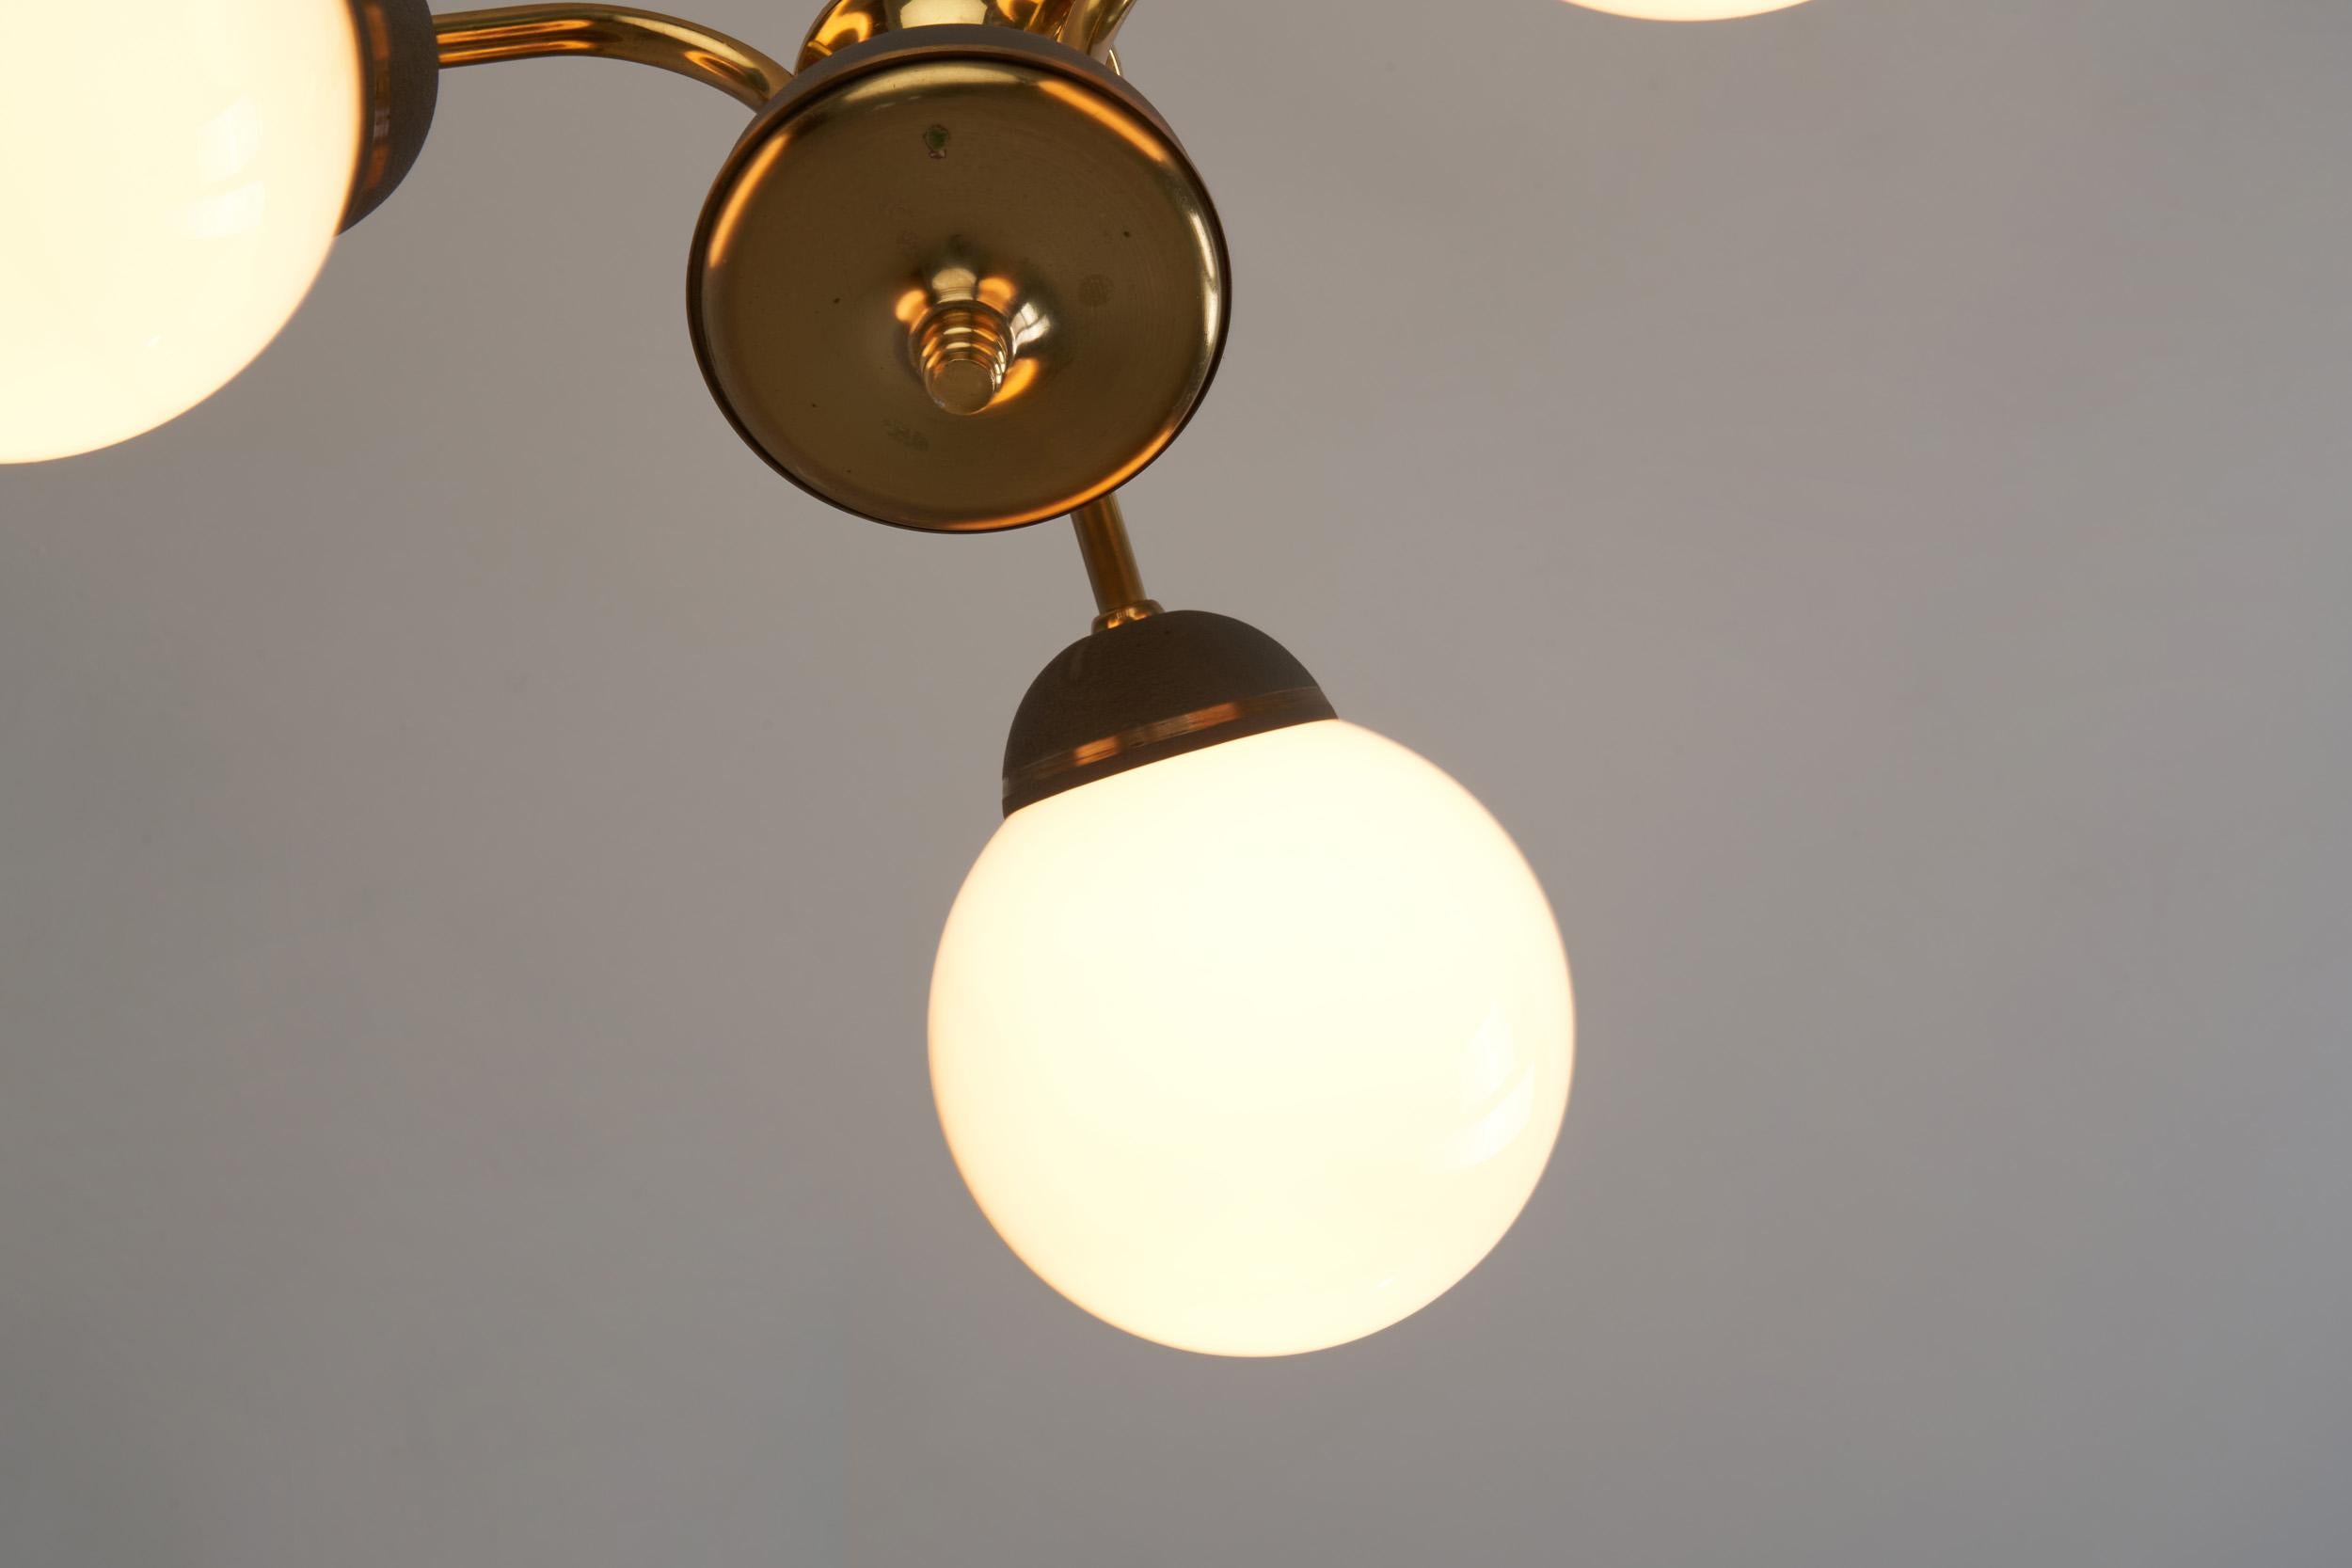 Brass Three-Armed Ceiling Lamp with Opal Glass Shades, Scandinavia 1950s For Sale 8